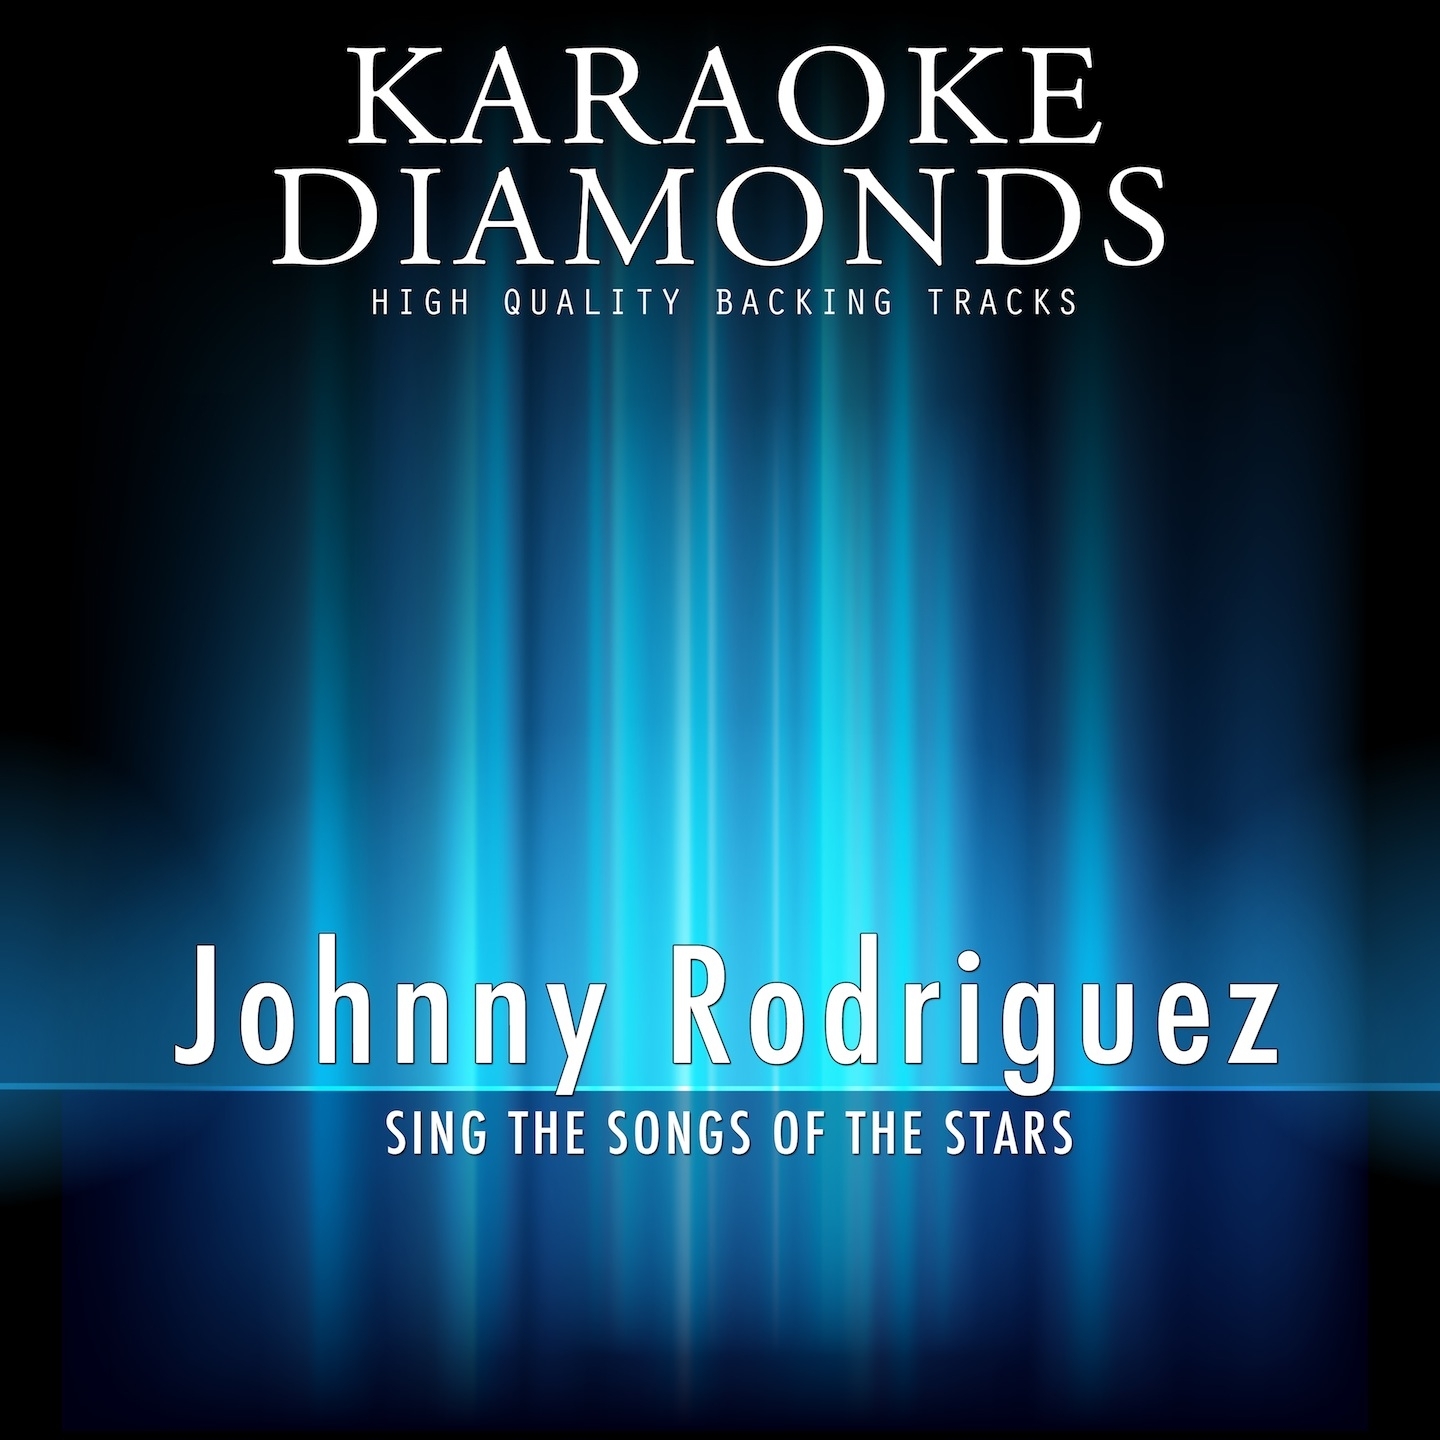 I Just Can't Get Her Out of My Mind (Karaoke Version In the Style of Johnny Rodriguez)